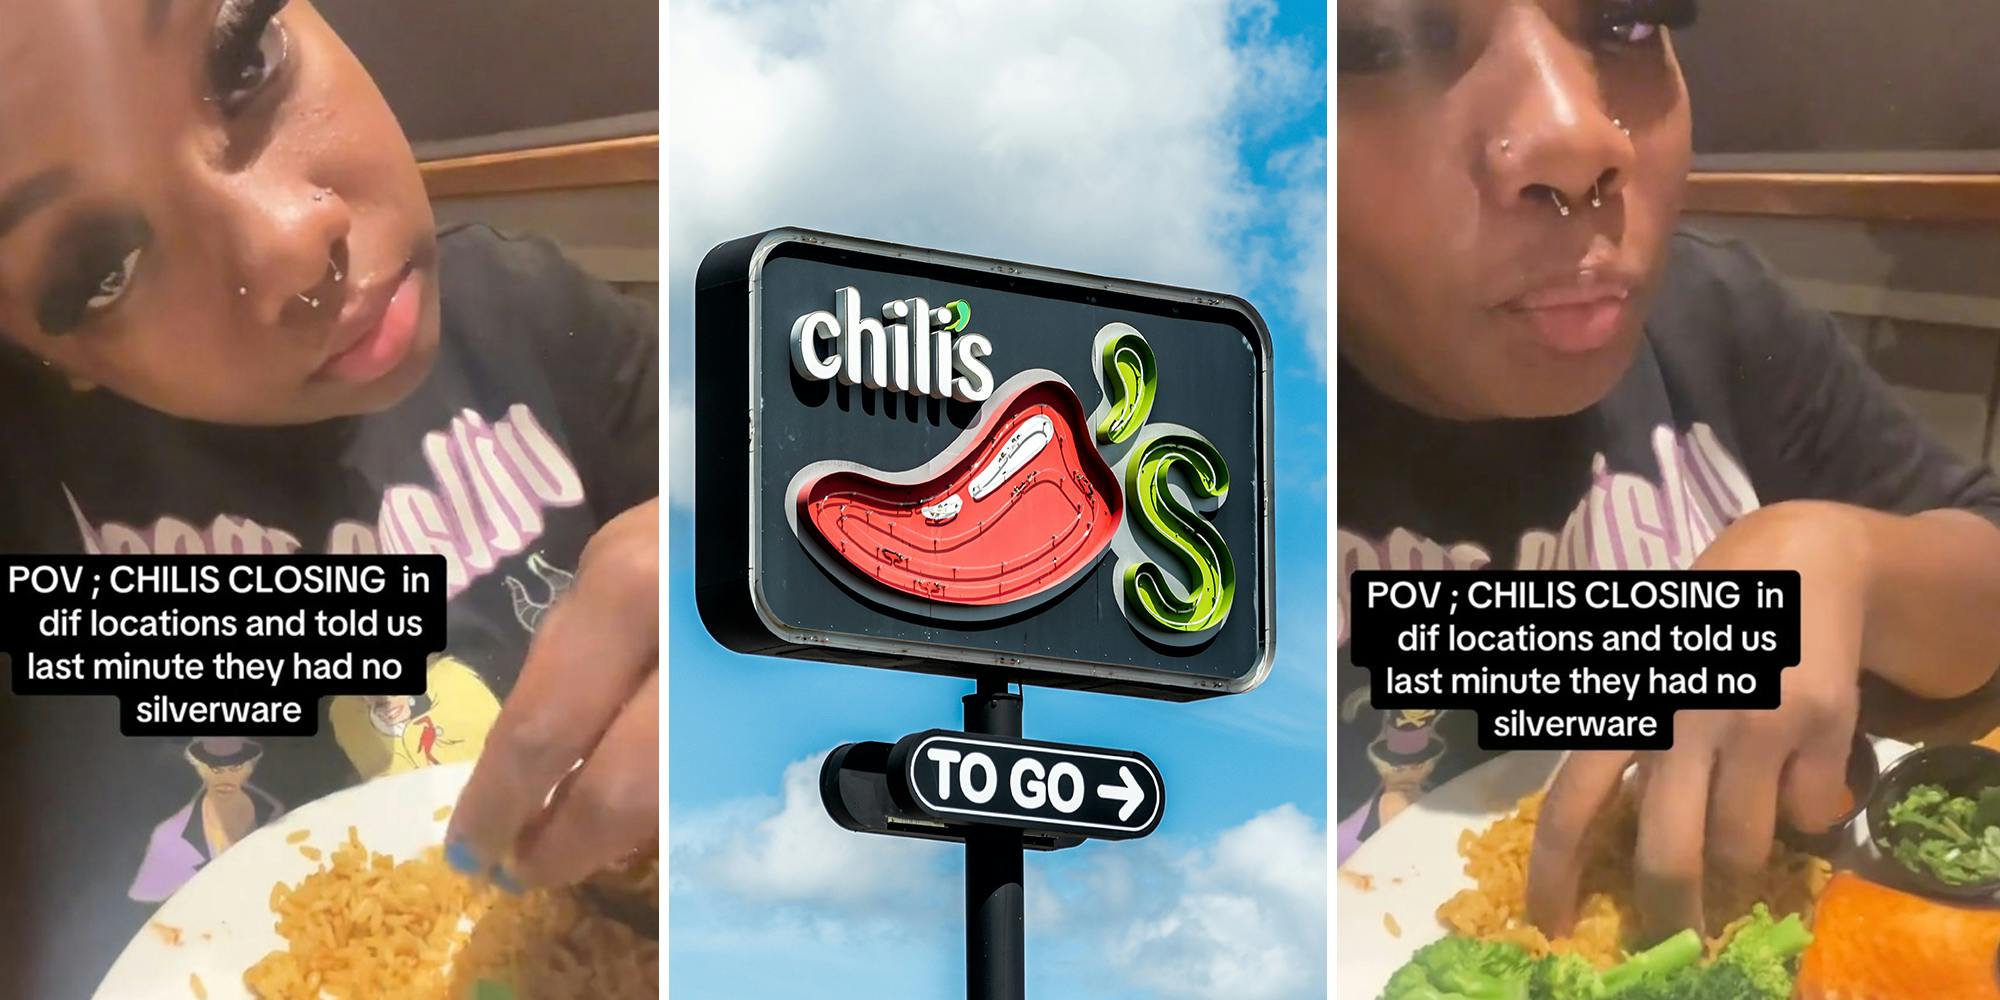 Chili’s customers have to eat rice their with hands after being told there is no silverware